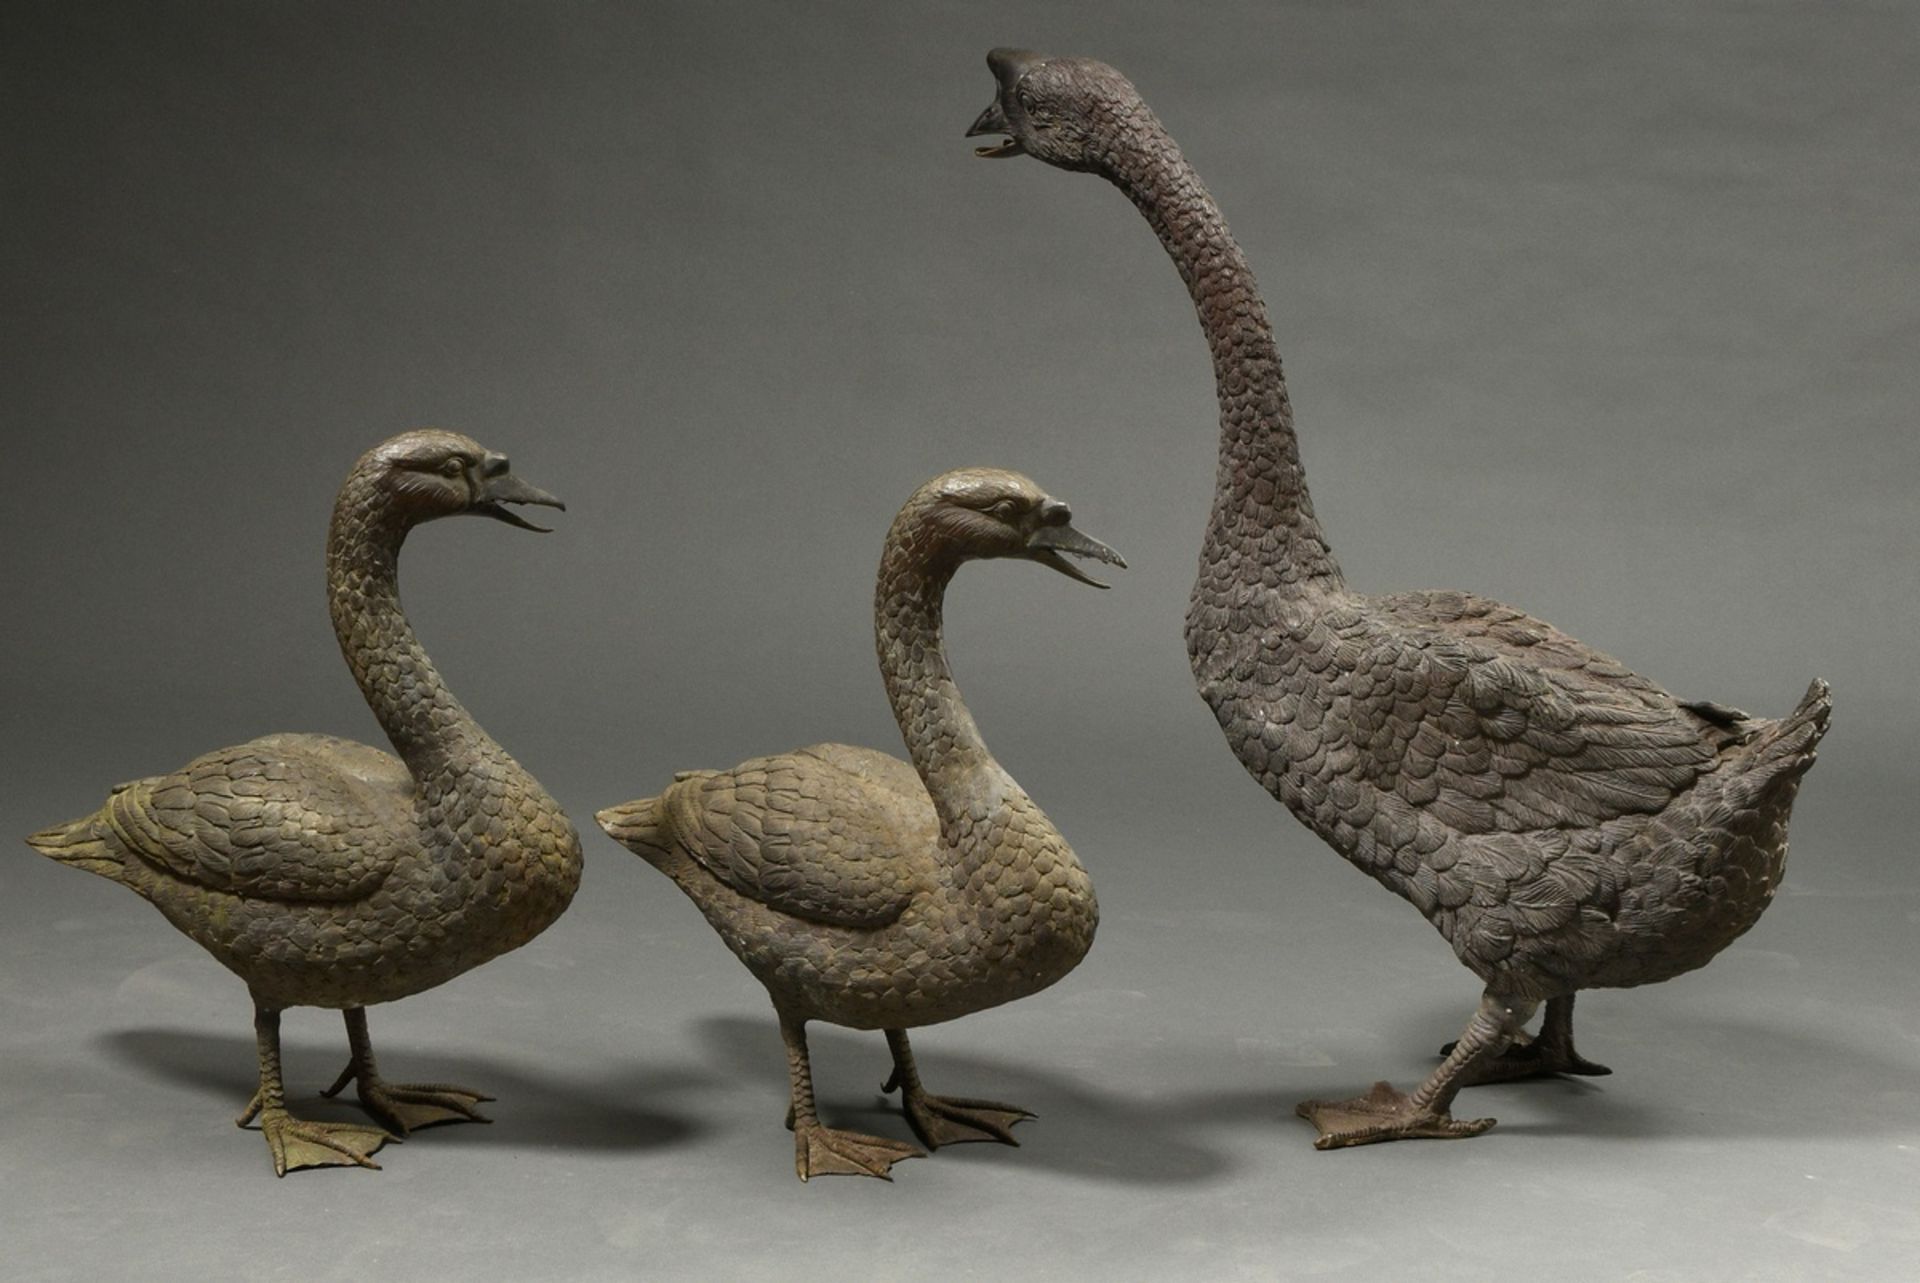 3 Bronze sculptures "Hump-backed swan with 2 young swans", h. 49/51/75cm, signs of age - Image 6 of 6